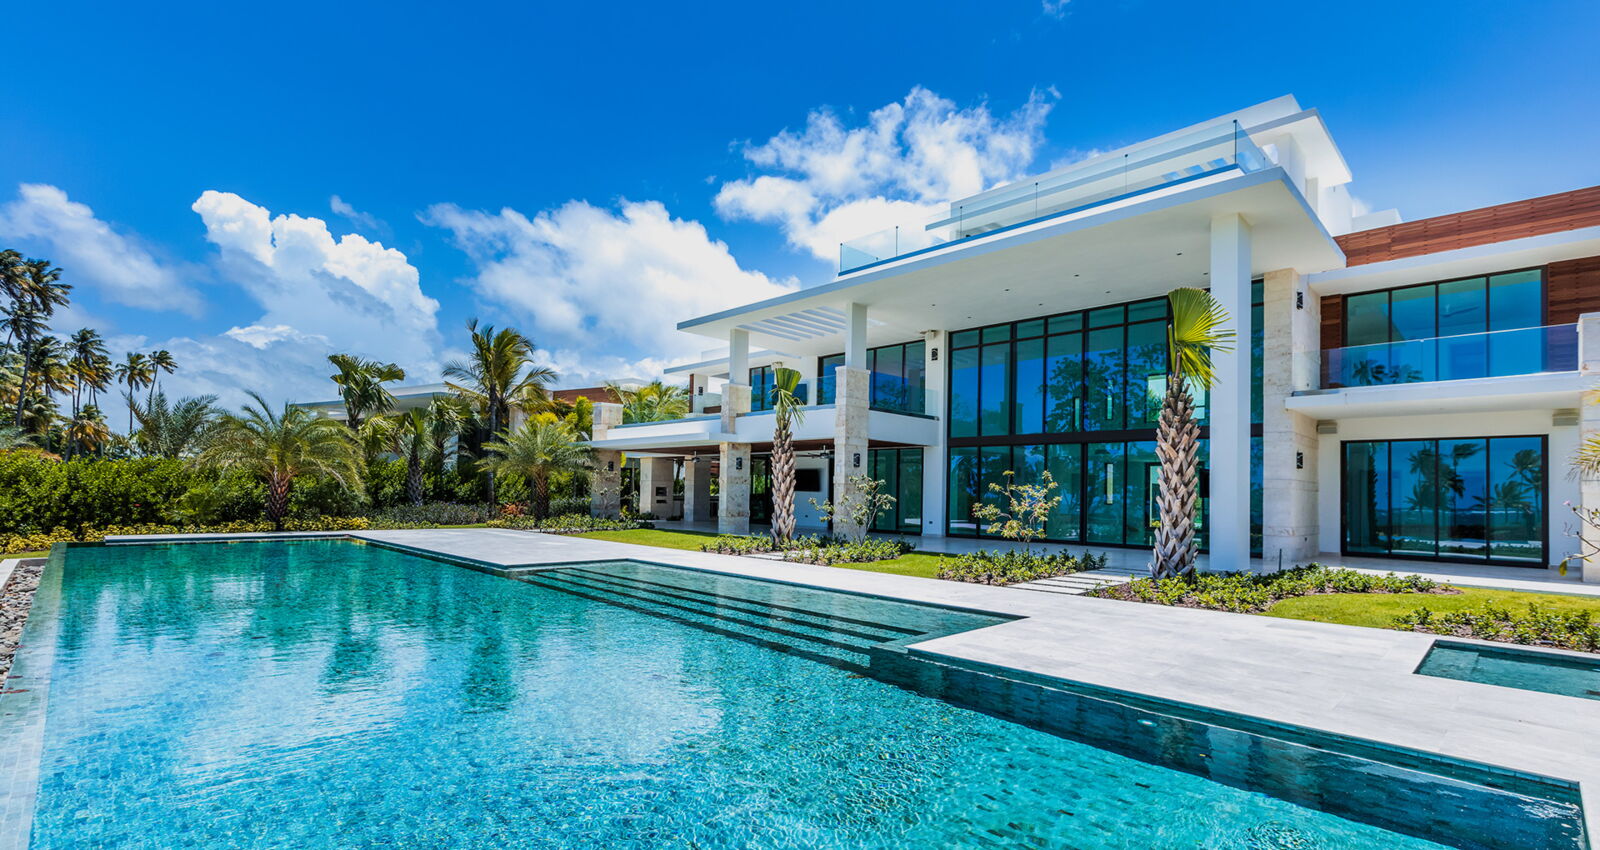 east beach estate for sale showcasing the pool and large windows